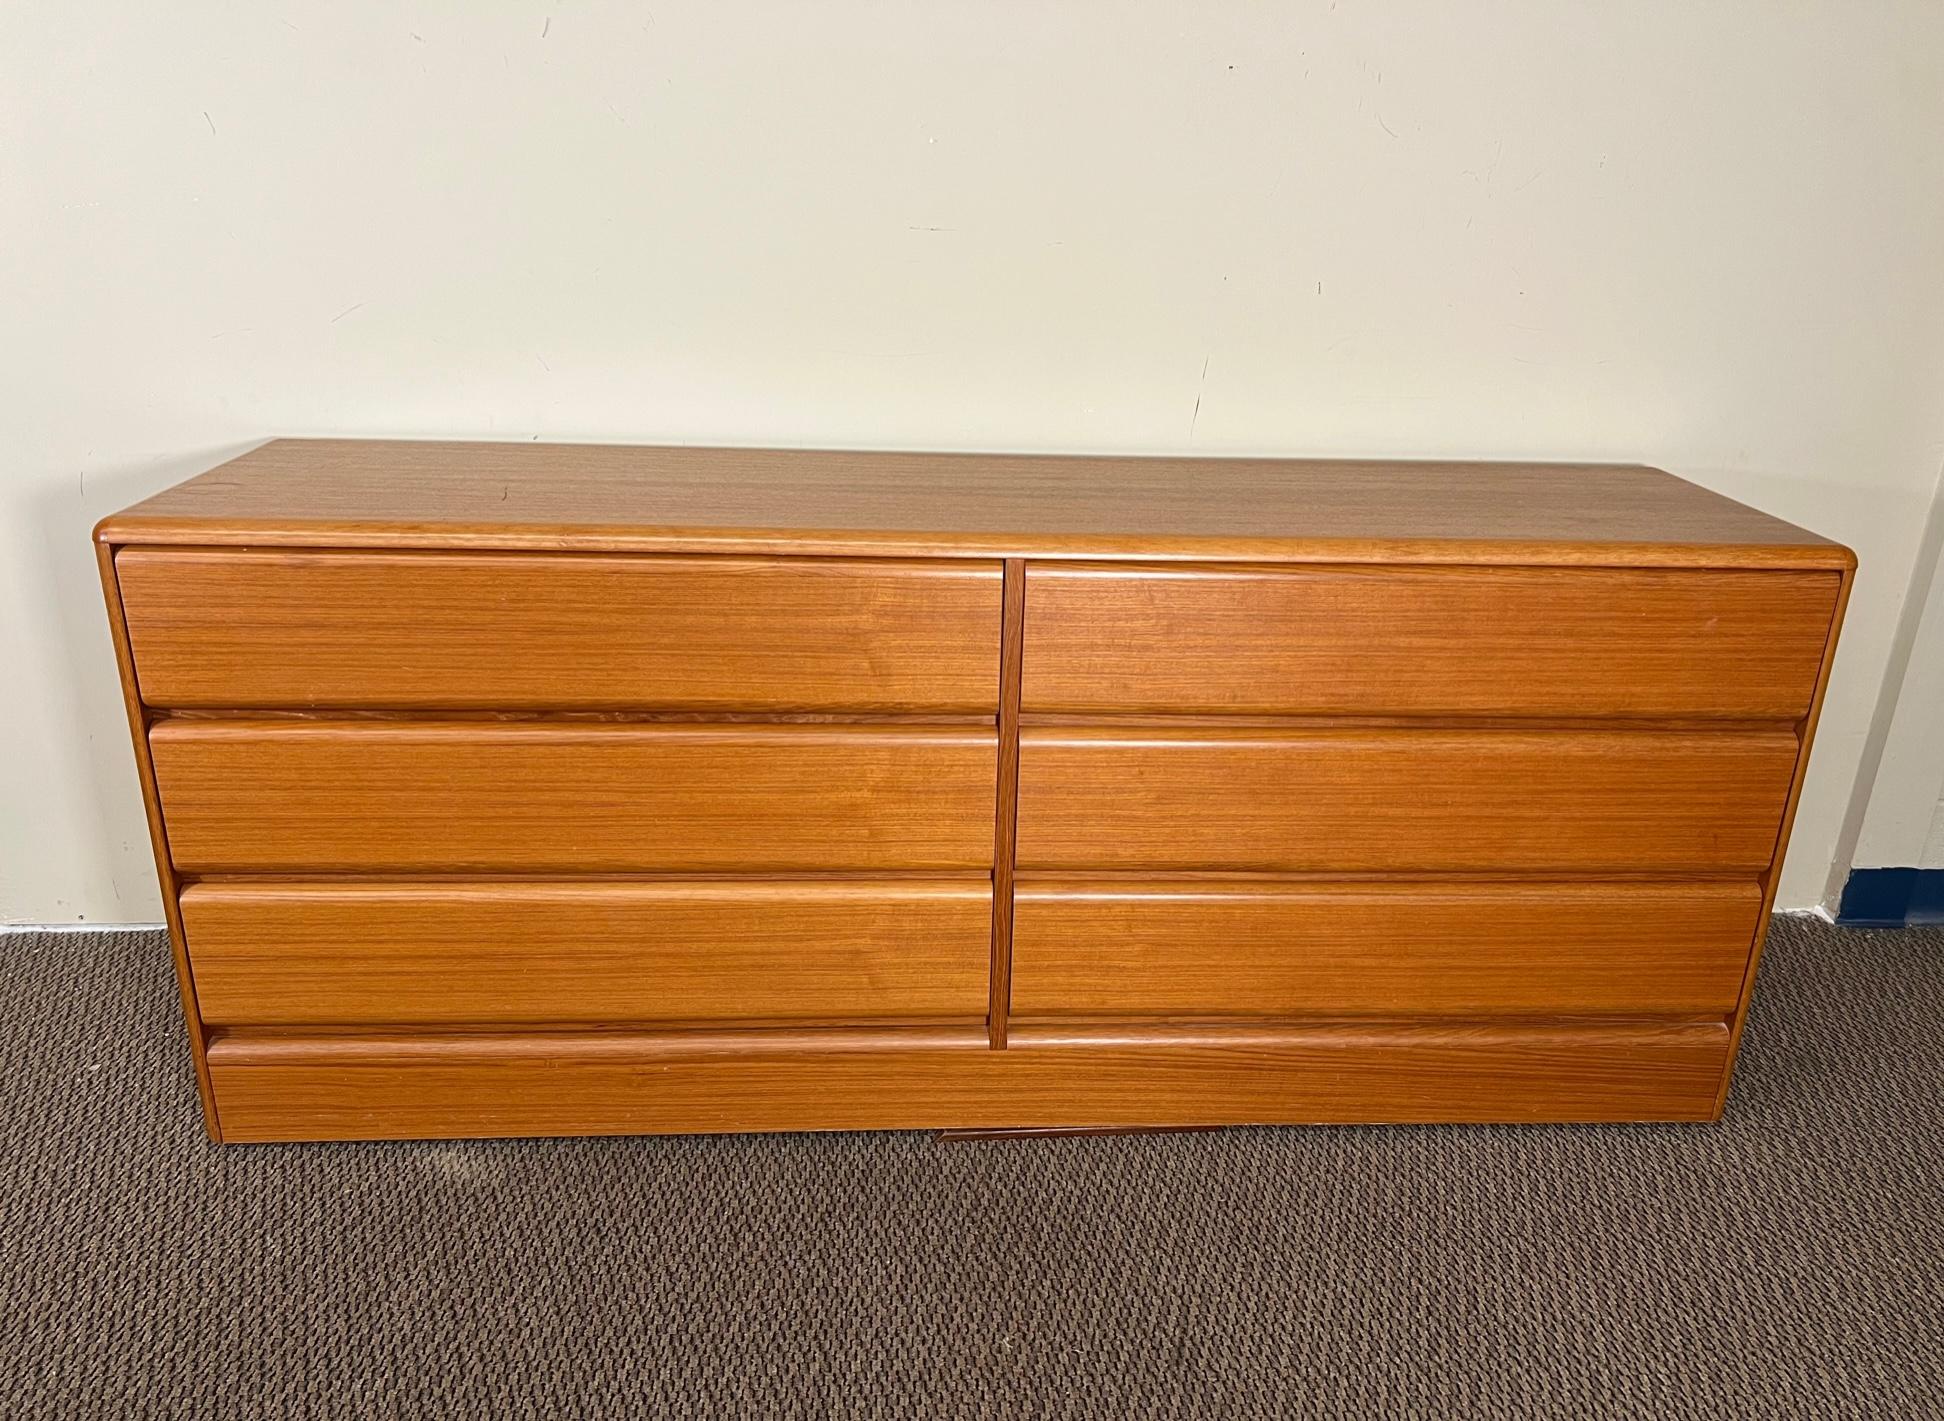 Gorgeous large Danish teak 6 drawer dresser by Sannemann. Made in Denmark.
Fantastic condition. Drawers open and close with ease. Round edges. Faint ring mark and small mall scratch on top. Tiny chip at the bottom back on the right side. A little